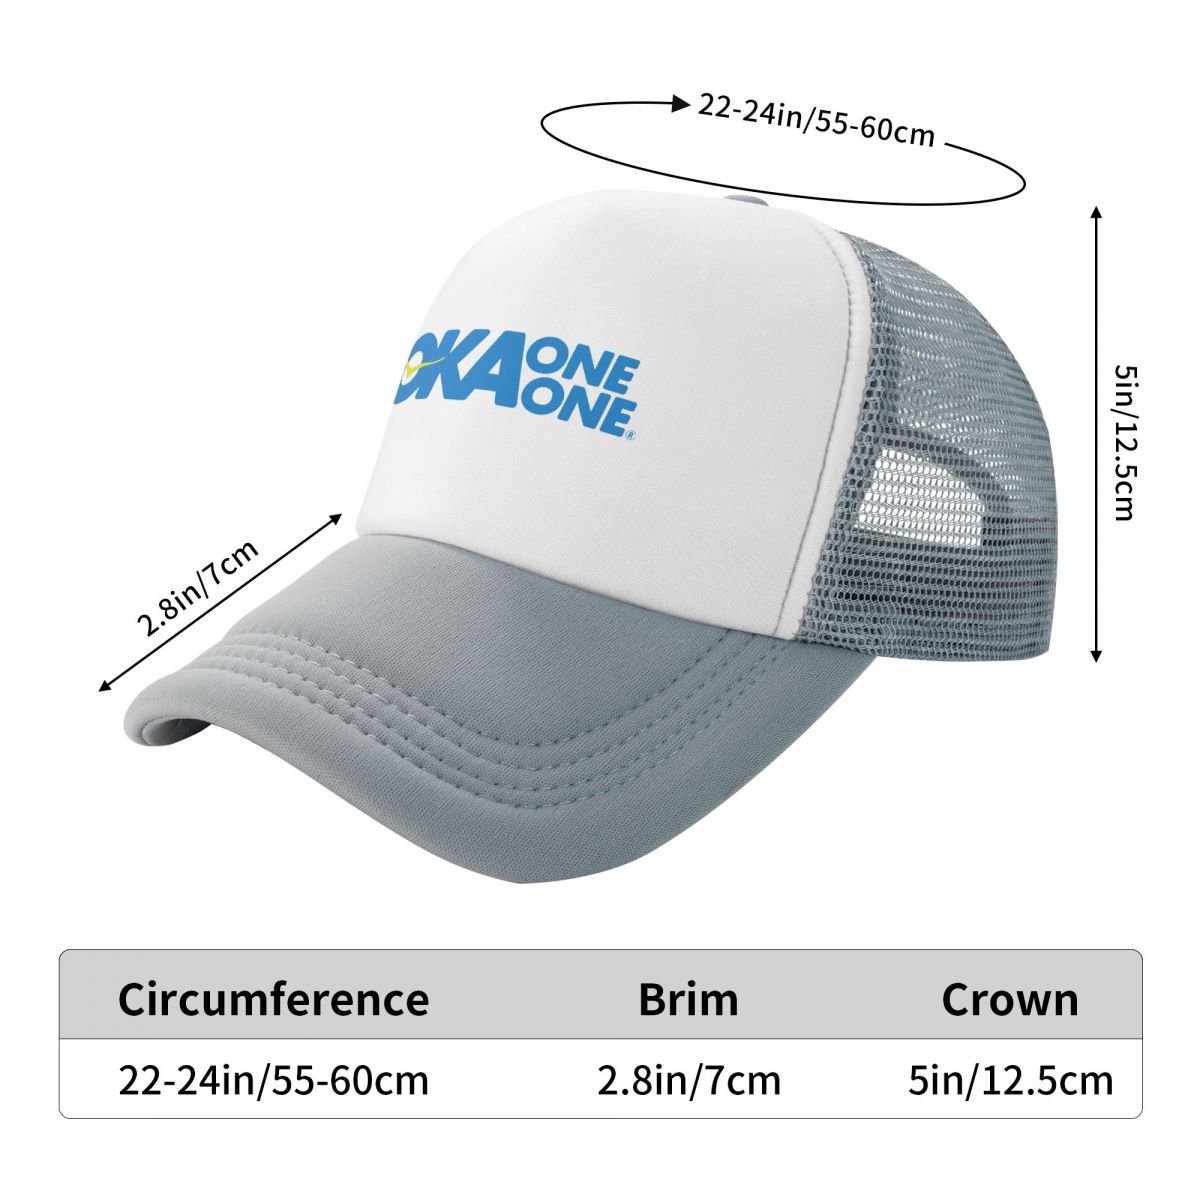 Hoka One One Funny Trucker Hat for Adult, Adjustable Washable Baseball Cap,  Fishing Hats Funny Gifts for Men and Women